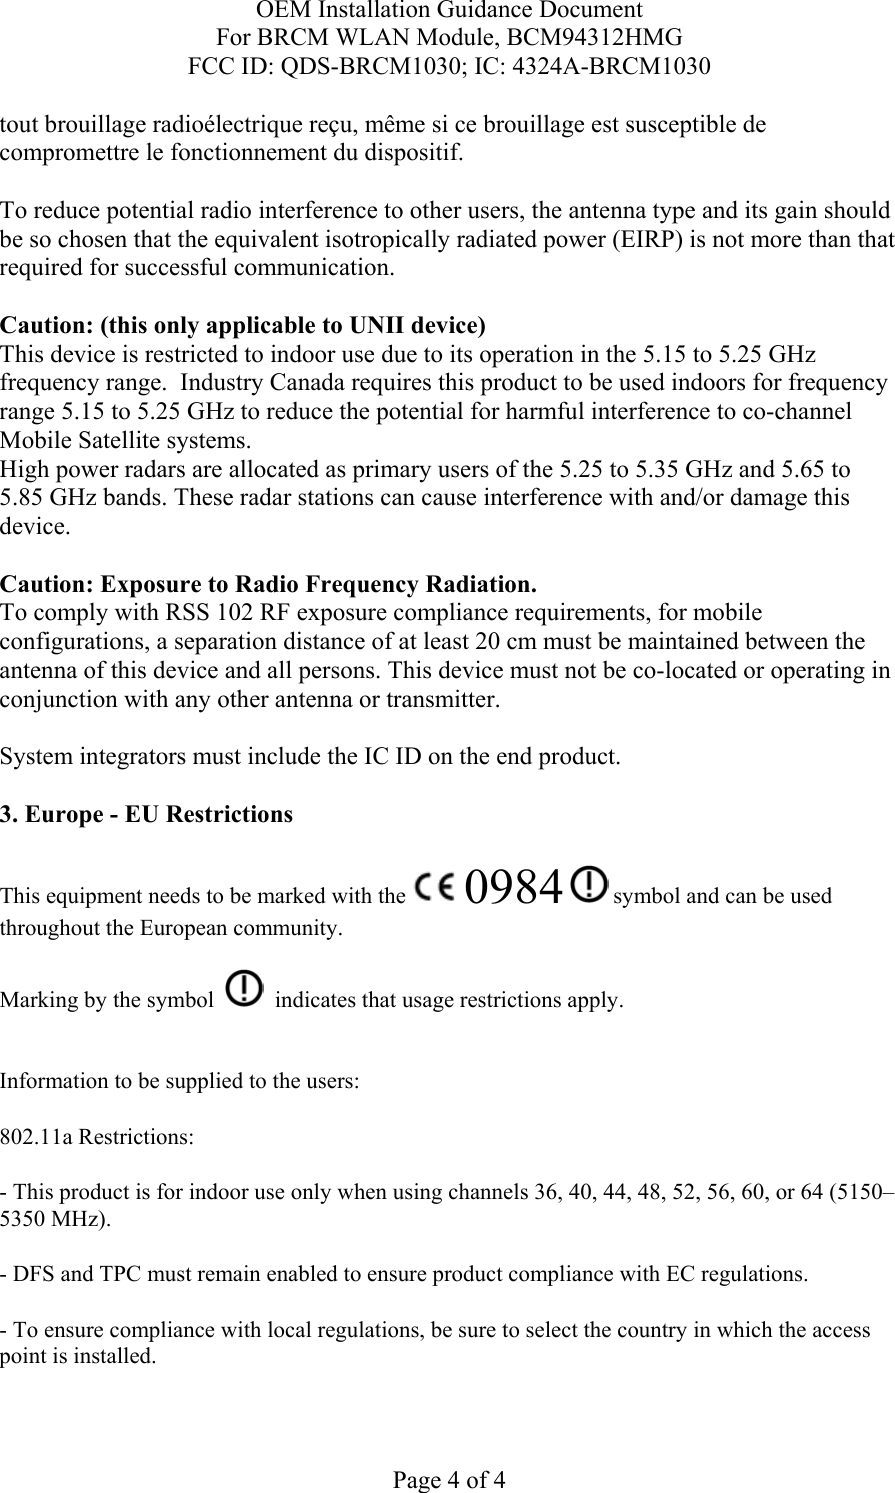 OEM Installation Guidance Document For BRCM WLAN Module, BCM94312HMG FCC ID: QDS-BRCM1030; IC: 4324A-BRCM1030  Page 4 of 4 tout brouillage radioélectrique reçu, même si ce brouillage est susceptible de compromettre le fonctionnement du dispositif.  To reduce potential radio interference to other users, the antenna type and its gain should be so chosen that the equivalent isotropically radiated power (EIRP) is not more than that required for successful communication.  Caution: (this only applicable to UNII device) This device is restricted to indoor use due to its operation in the 5.15 to 5.25 GHz frequency range.  Industry Canada requires this product to be used indoors for frequency range 5.15 to 5.25 GHz to reduce the potential for harmful interference to co-channel Mobile Satellite systems. High power radars are allocated as primary users of the 5.25 to 5.35 GHz and 5.65 to 5.85 GHz bands. These radar stations can cause interference with and/or damage this device.  Caution: Exposure to Radio Frequency Radiation. To comply with RSS 102 RF exposure compliance requirements, for mobile configurations, a separation distance of at least 20 cm must be maintained between the antenna of this device and all persons. This device must not be co-located or operating in conjunction with any other antenna or transmitter.  System integrators must include the IC ID on the end product.   3. Europe - EU Restrictions This equipment needs to be marked with the   0984  symbol and can be used throughout the European community.  Marking by the symbol     indicates that usage restrictions apply.  Information to be supplied to the users: 802.11a Restrictions: - This product is for indoor use only when using channels 36, 40, 44, 48, 52, 56, 60, or 64 (5150–5350 MHz).       - DFS and TPC must remain enabled to ensure product compliance with EC regulations.      - To ensure compliance with local regulations, be sure to select the country in which the access point is installed. 